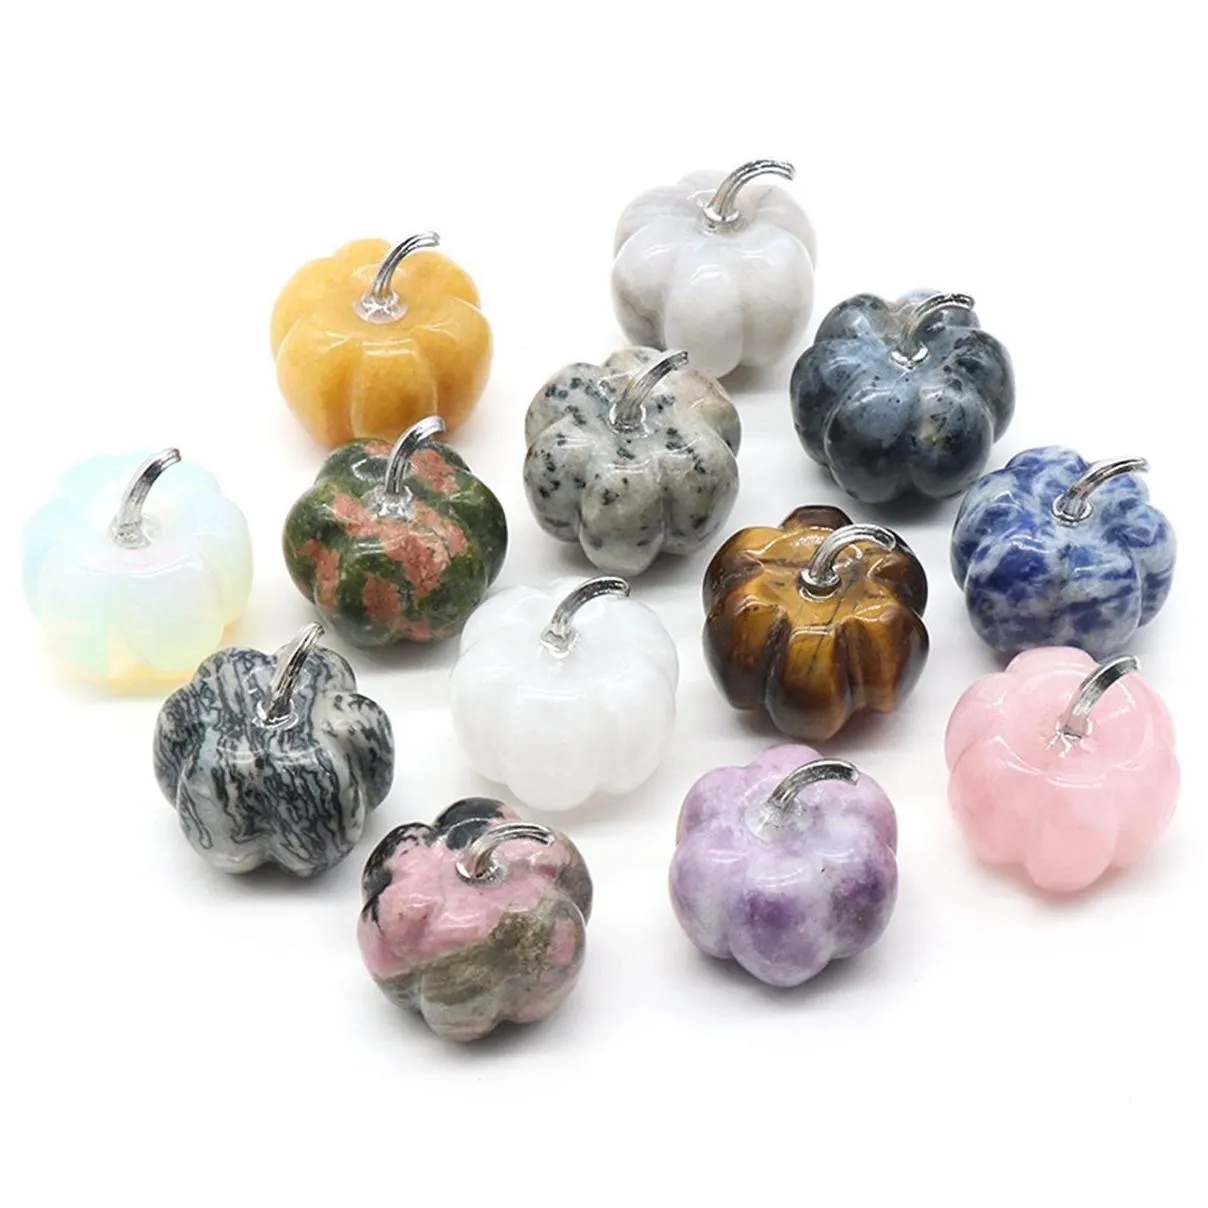 30mm Healing Pumpkin Stones Natural Crystal Hand Made Carving Pumpkin Shape Stone For Christmas Gifts